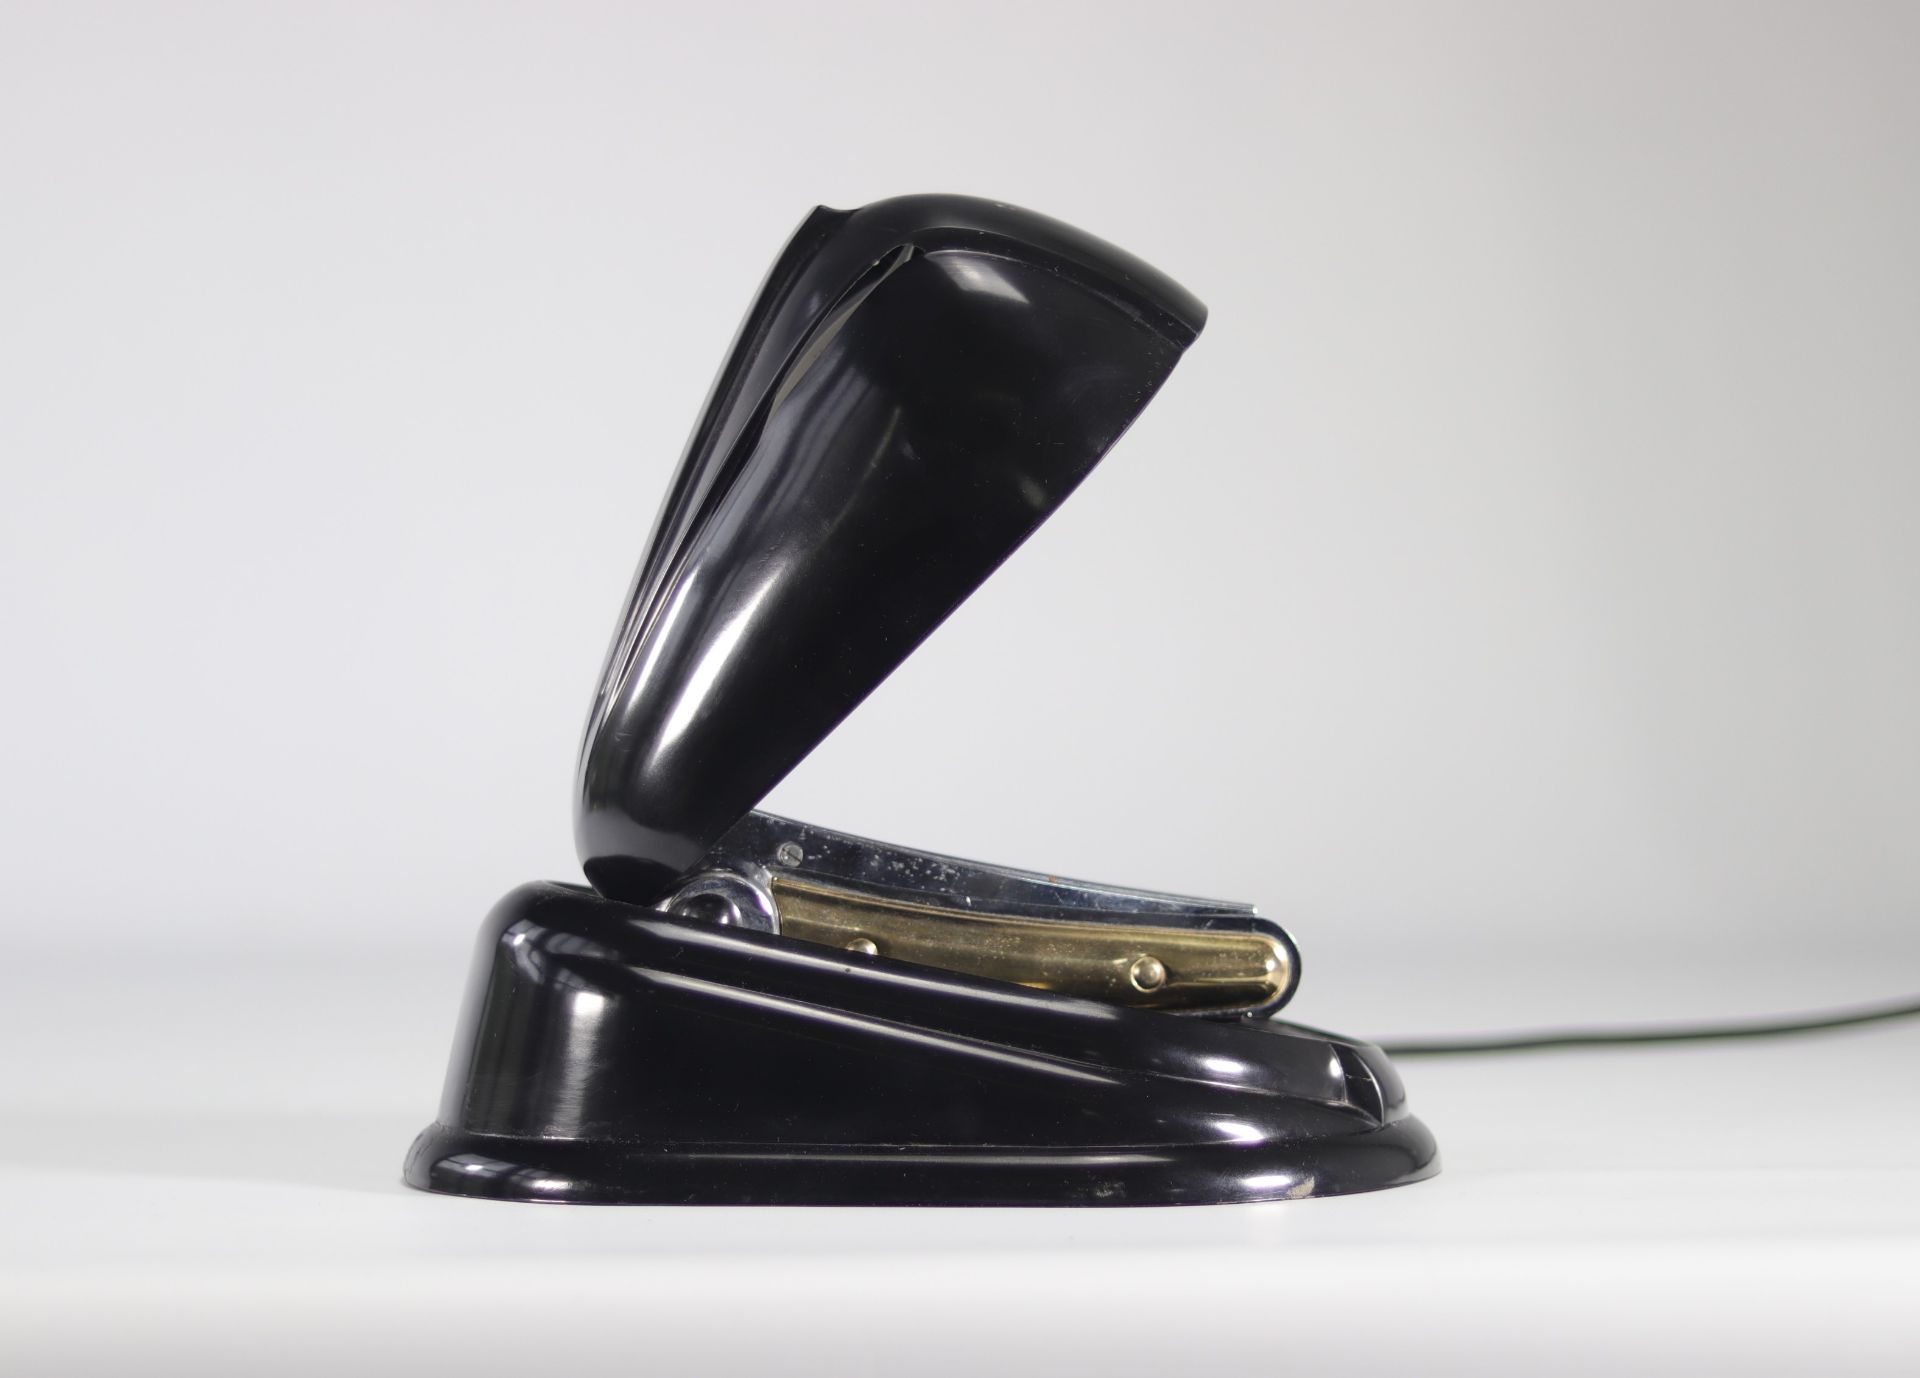 Jumo Articulated desk lamp with adjustable and retractable cap, bakelite model called "Bolide" - Image 2 of 3